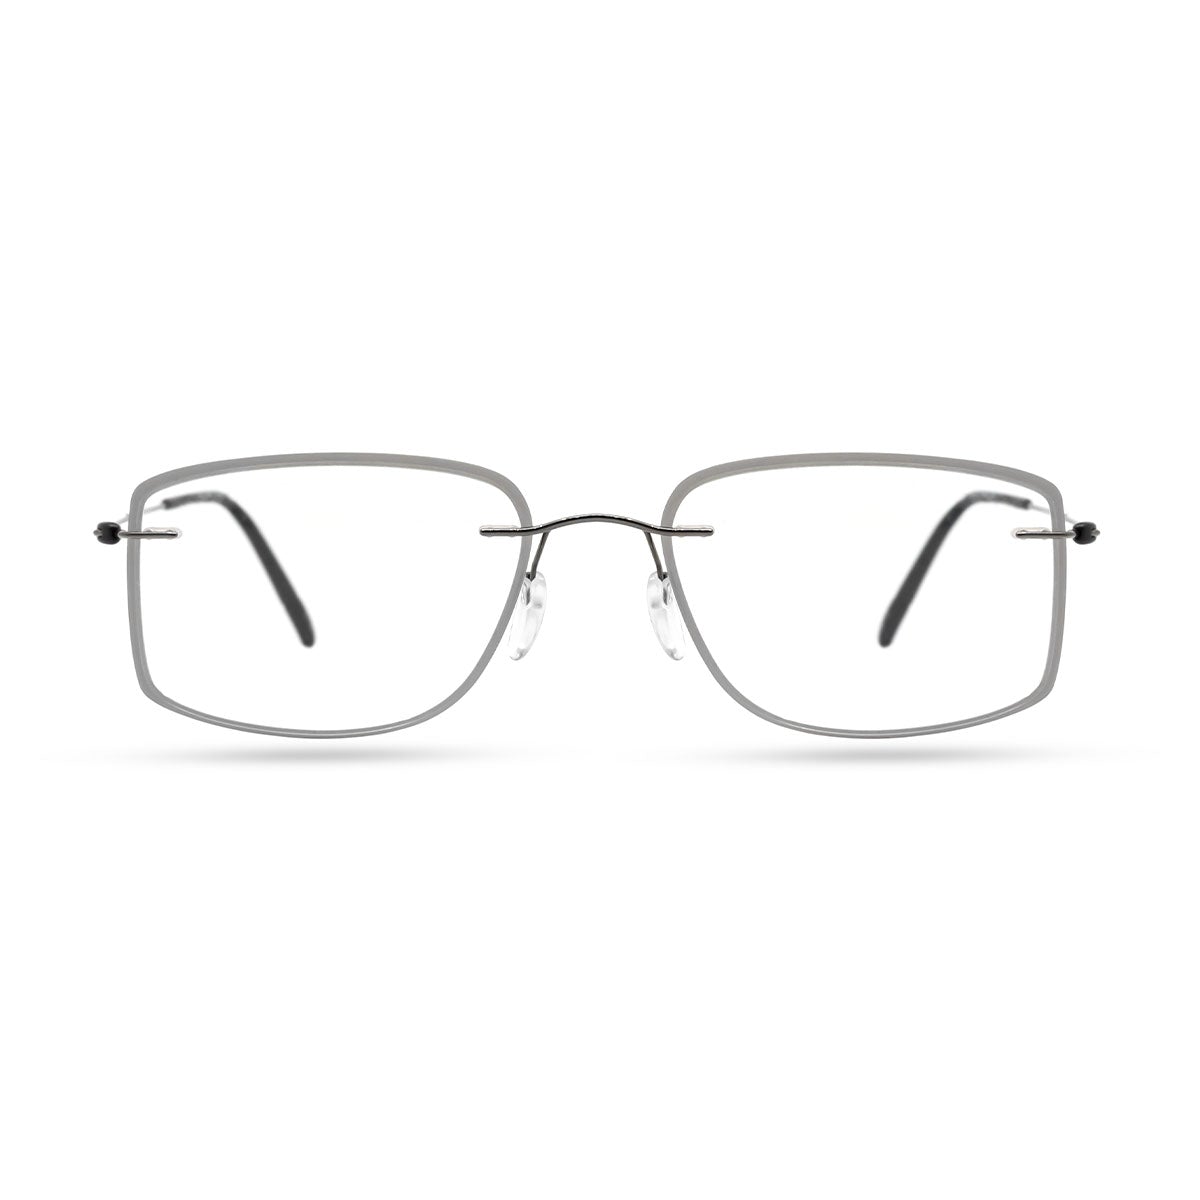 SILHOUETTE 5500 GX 6860 spectacle-frame